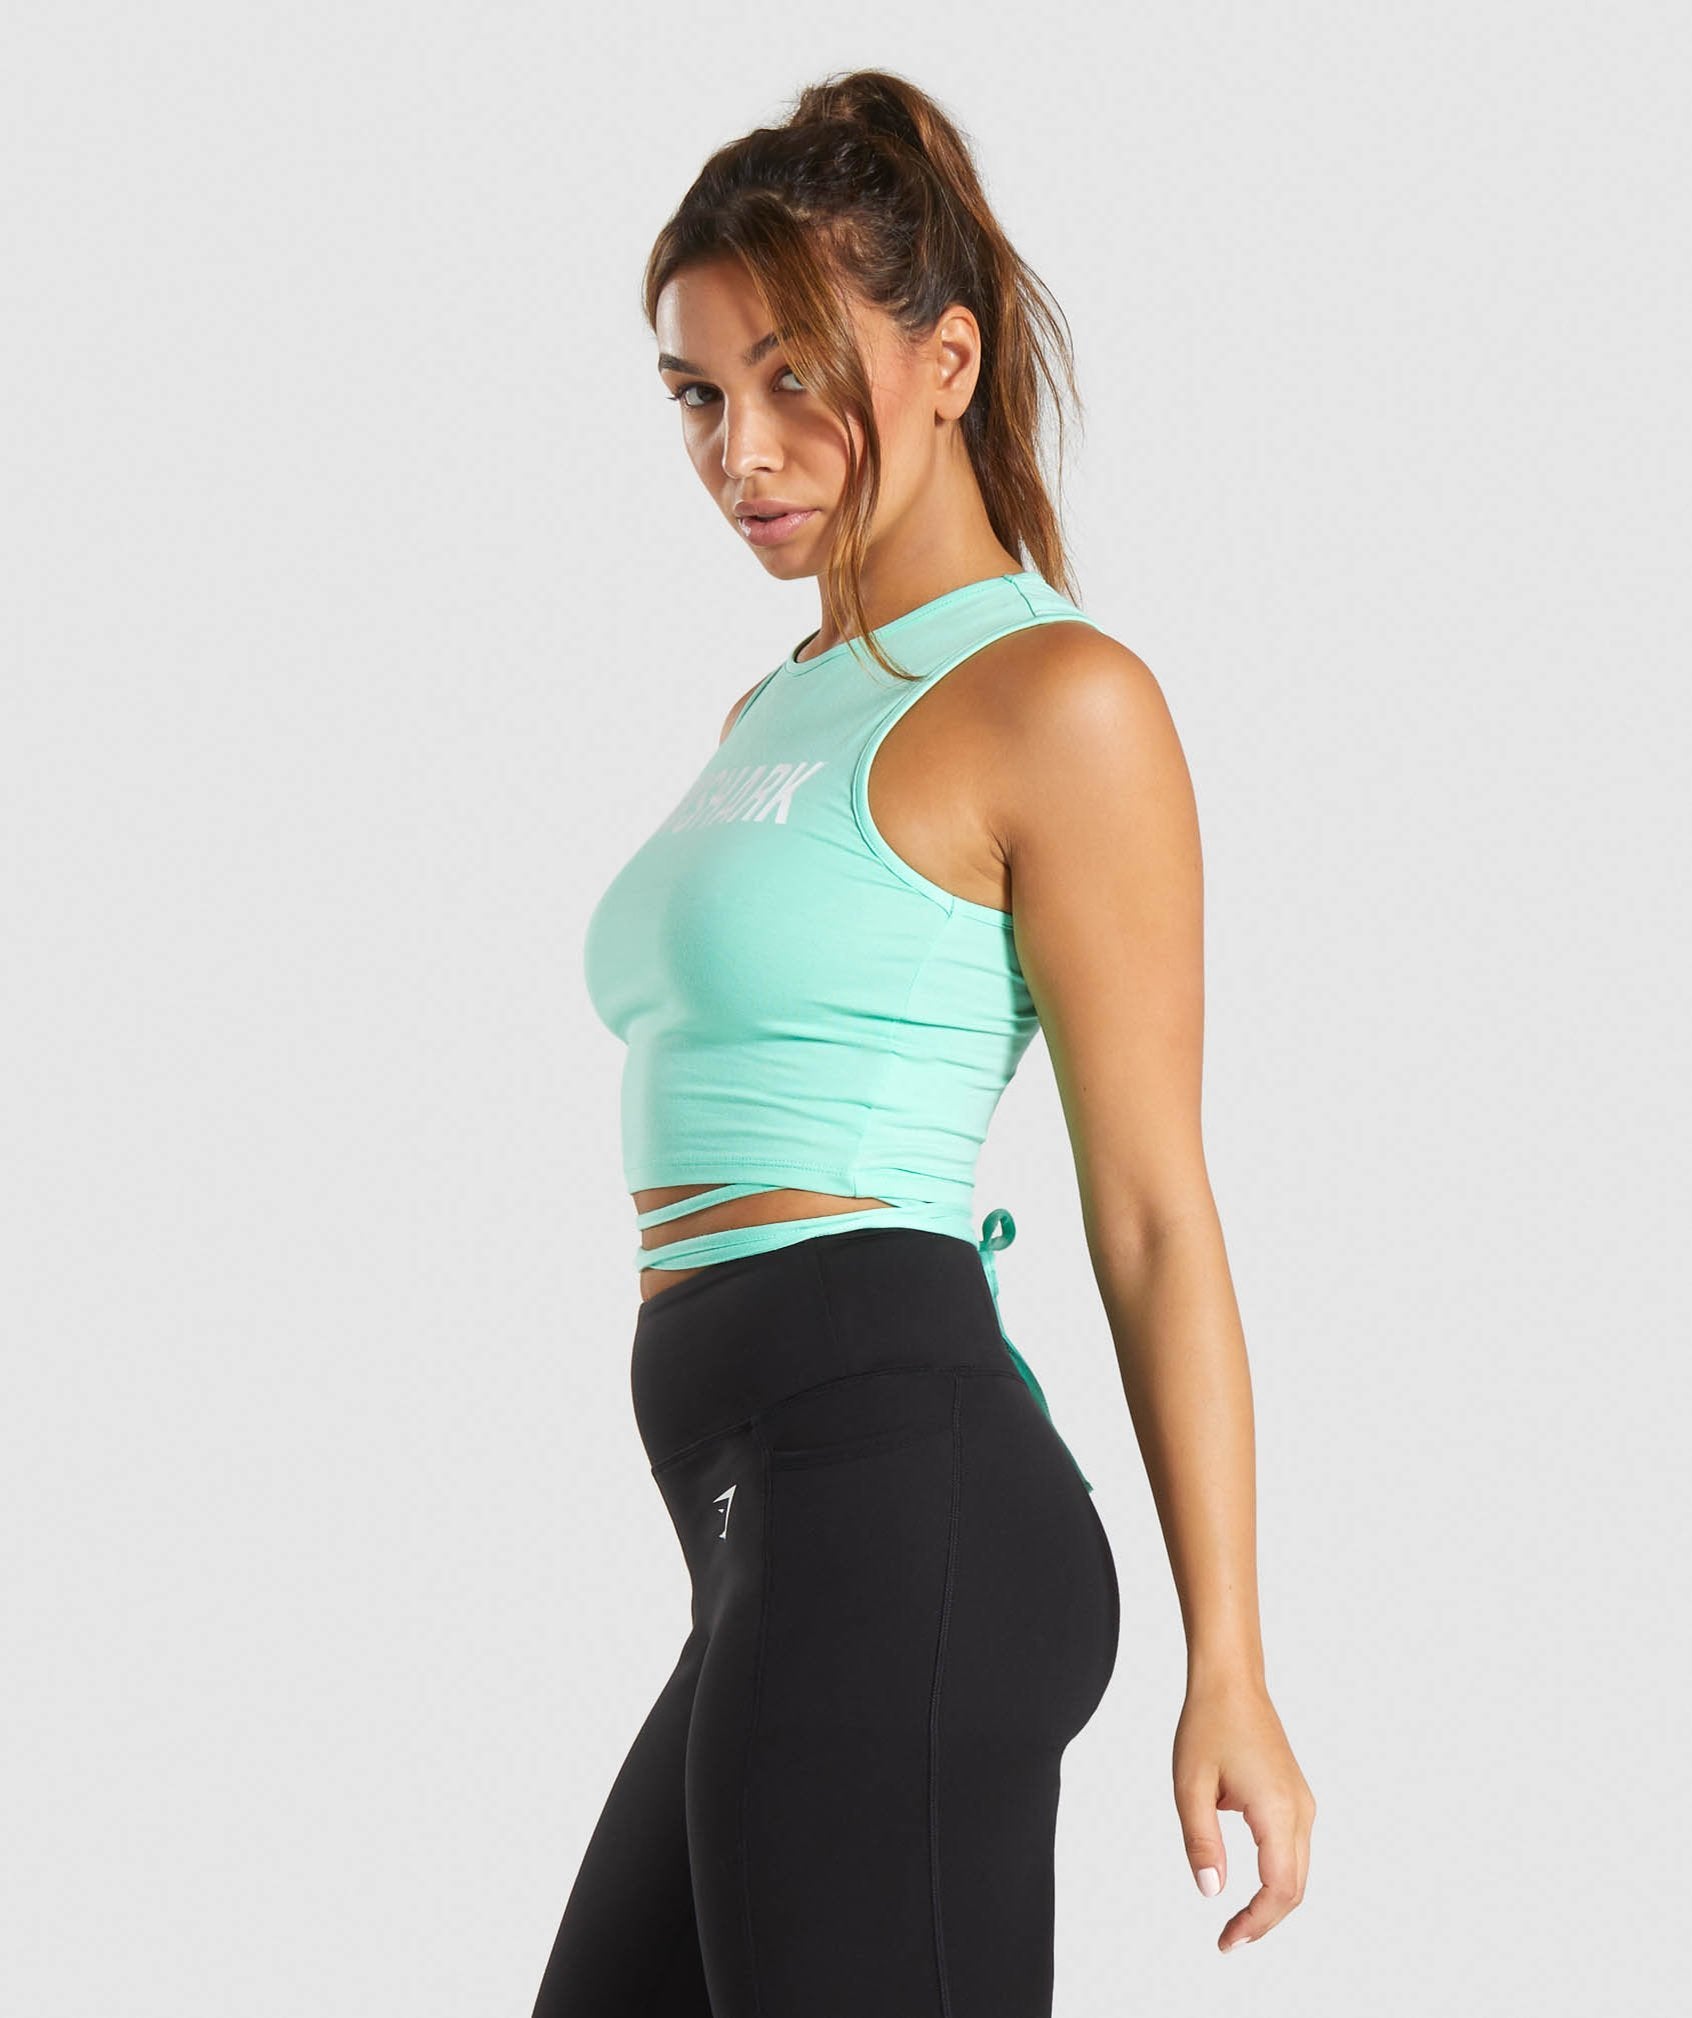 Ribbon Crop Top in Mint - view 3